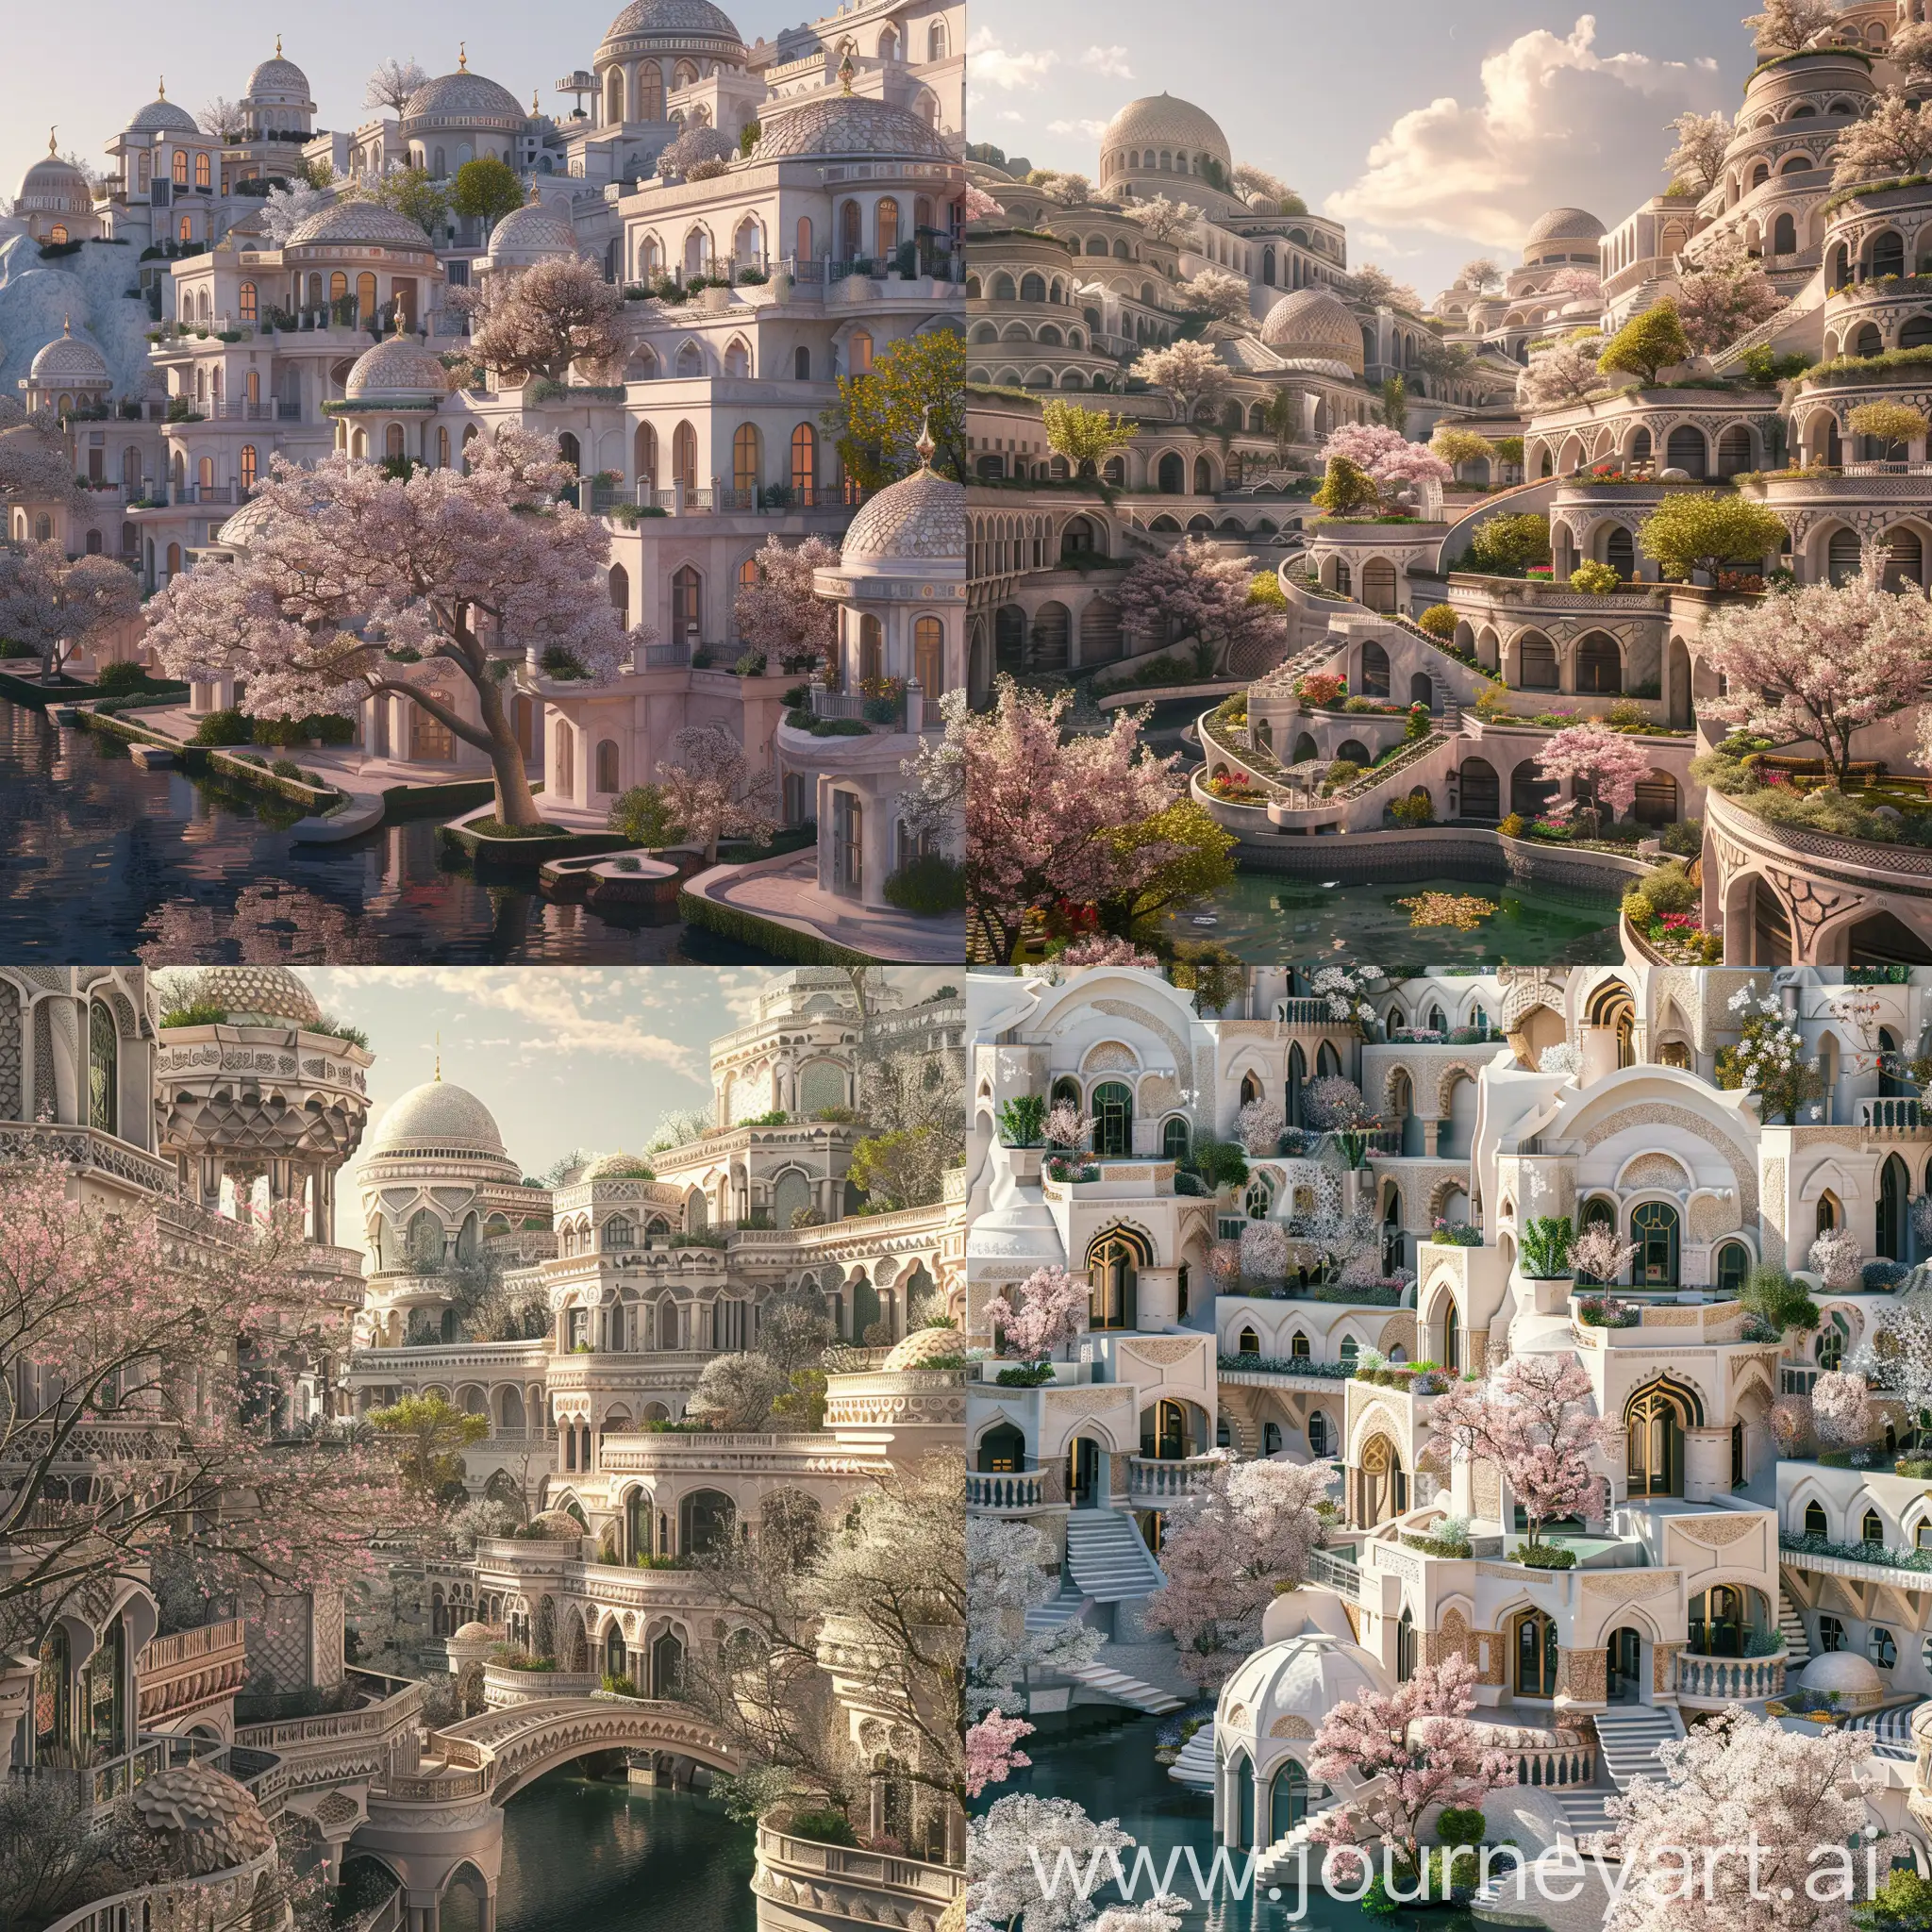 Beautiful futuristic metropolis in an alternate timeline where all buildings retain traditional elements, ornate travertine architecture with scale-like patterns on facades and blossoming trees, monumental terraced buildings, canals, Turkish vibe, spring morning, photograph